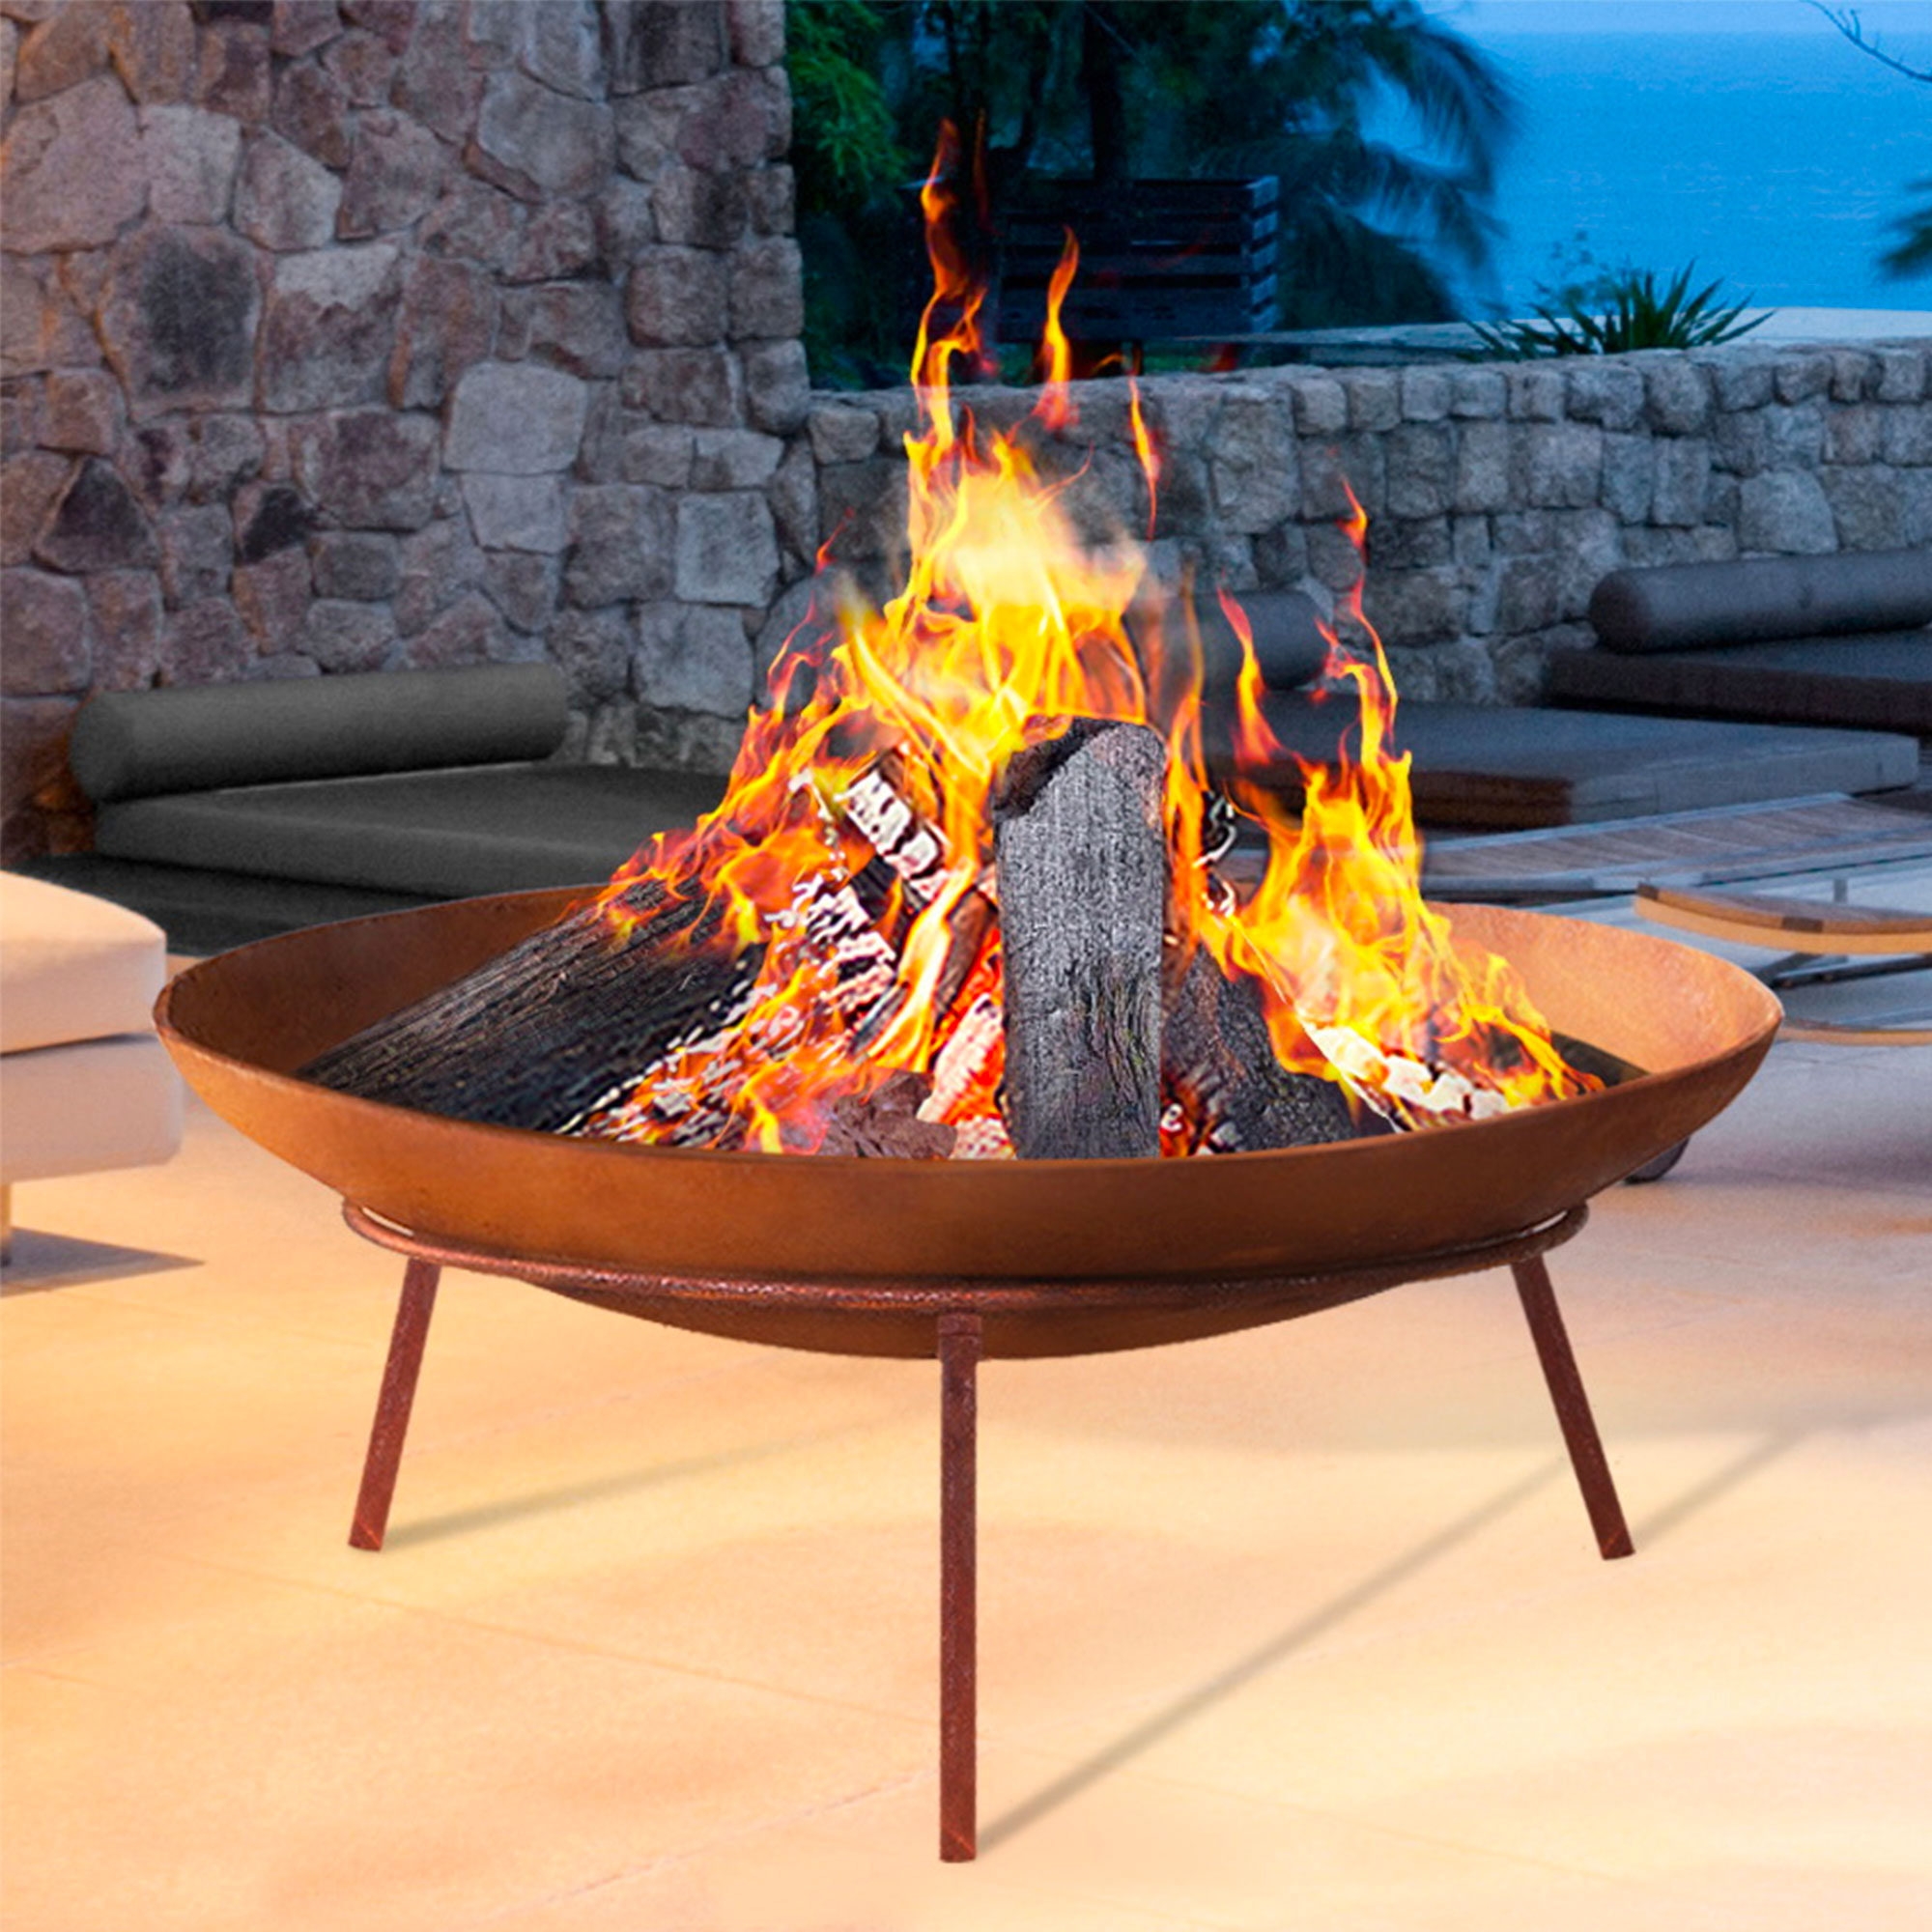 Grillz Outdoor Fire Pit 60cm Rustic Morocco Image 2